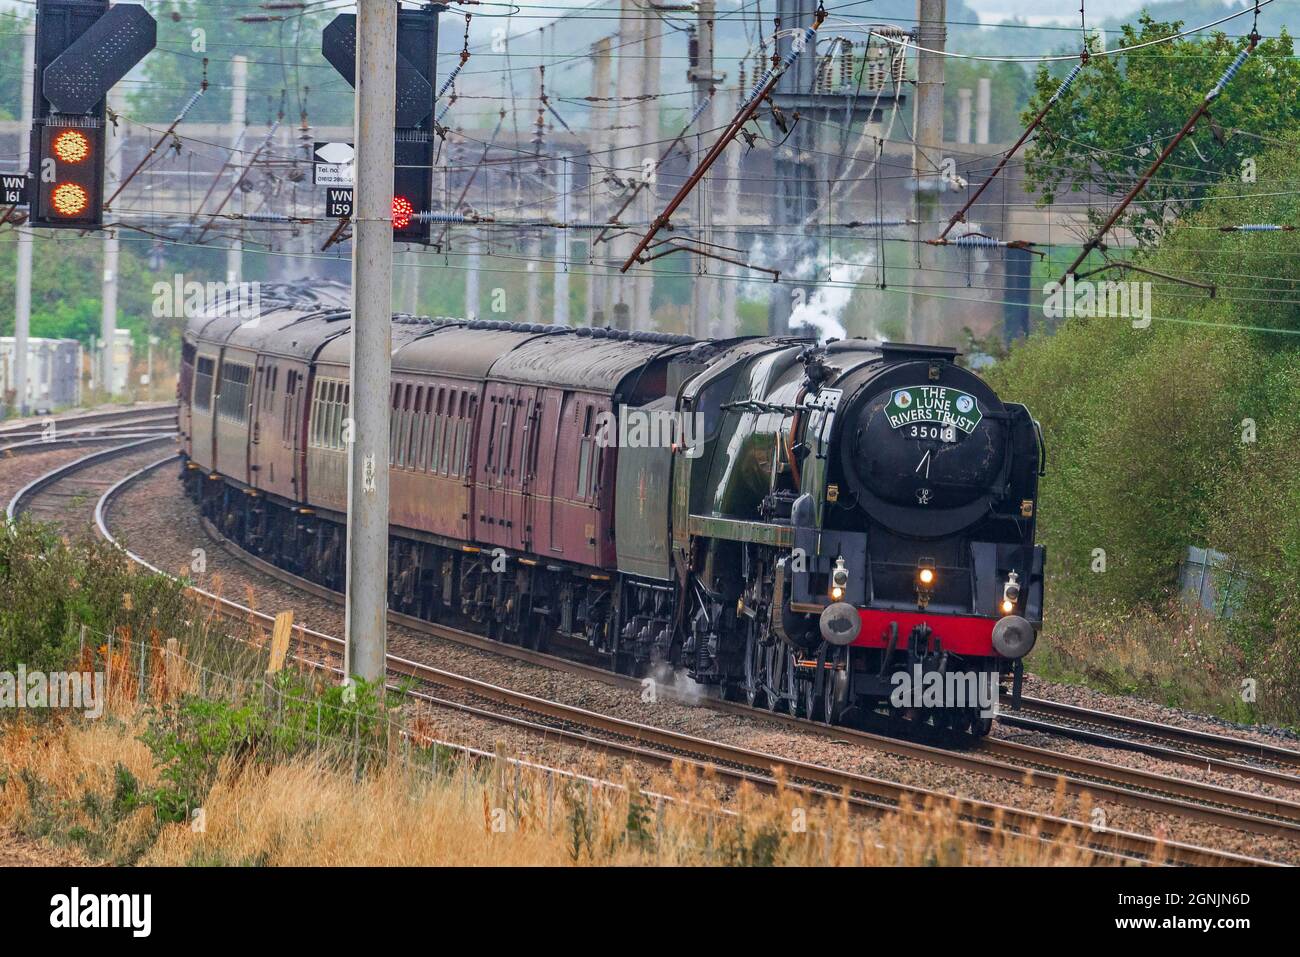 SR Merchant Navy Class 35018 British India Line restored steam locomotive, seen running south on the West Coast Main Line at Winwick hauling the Lune Stock Photo